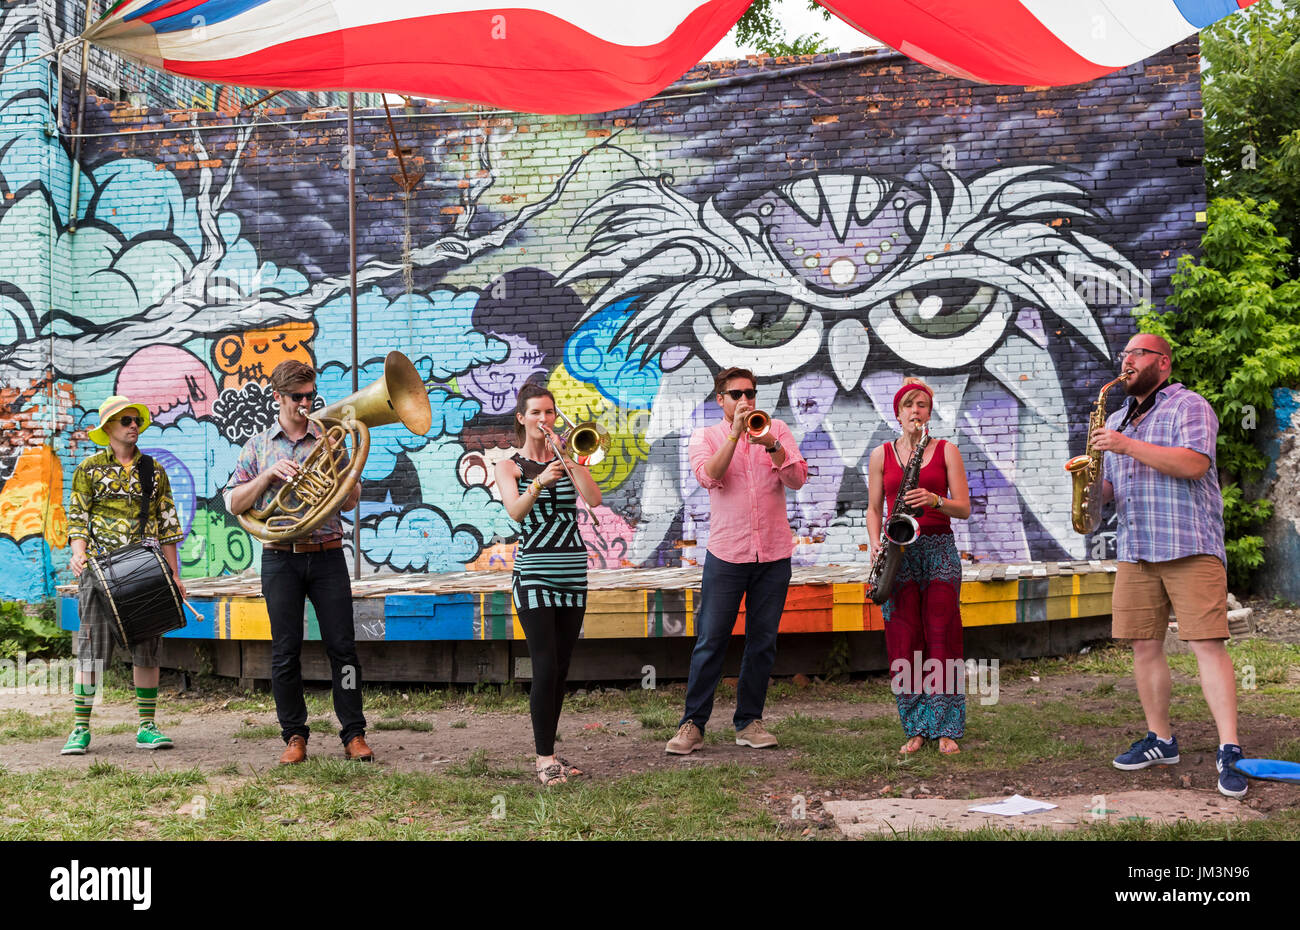 Detroit, Michigan - The band Rhyta Musik plays during Crash Detroit, a festival of street bands at the Lincoln Street Art Park. Stock Photo